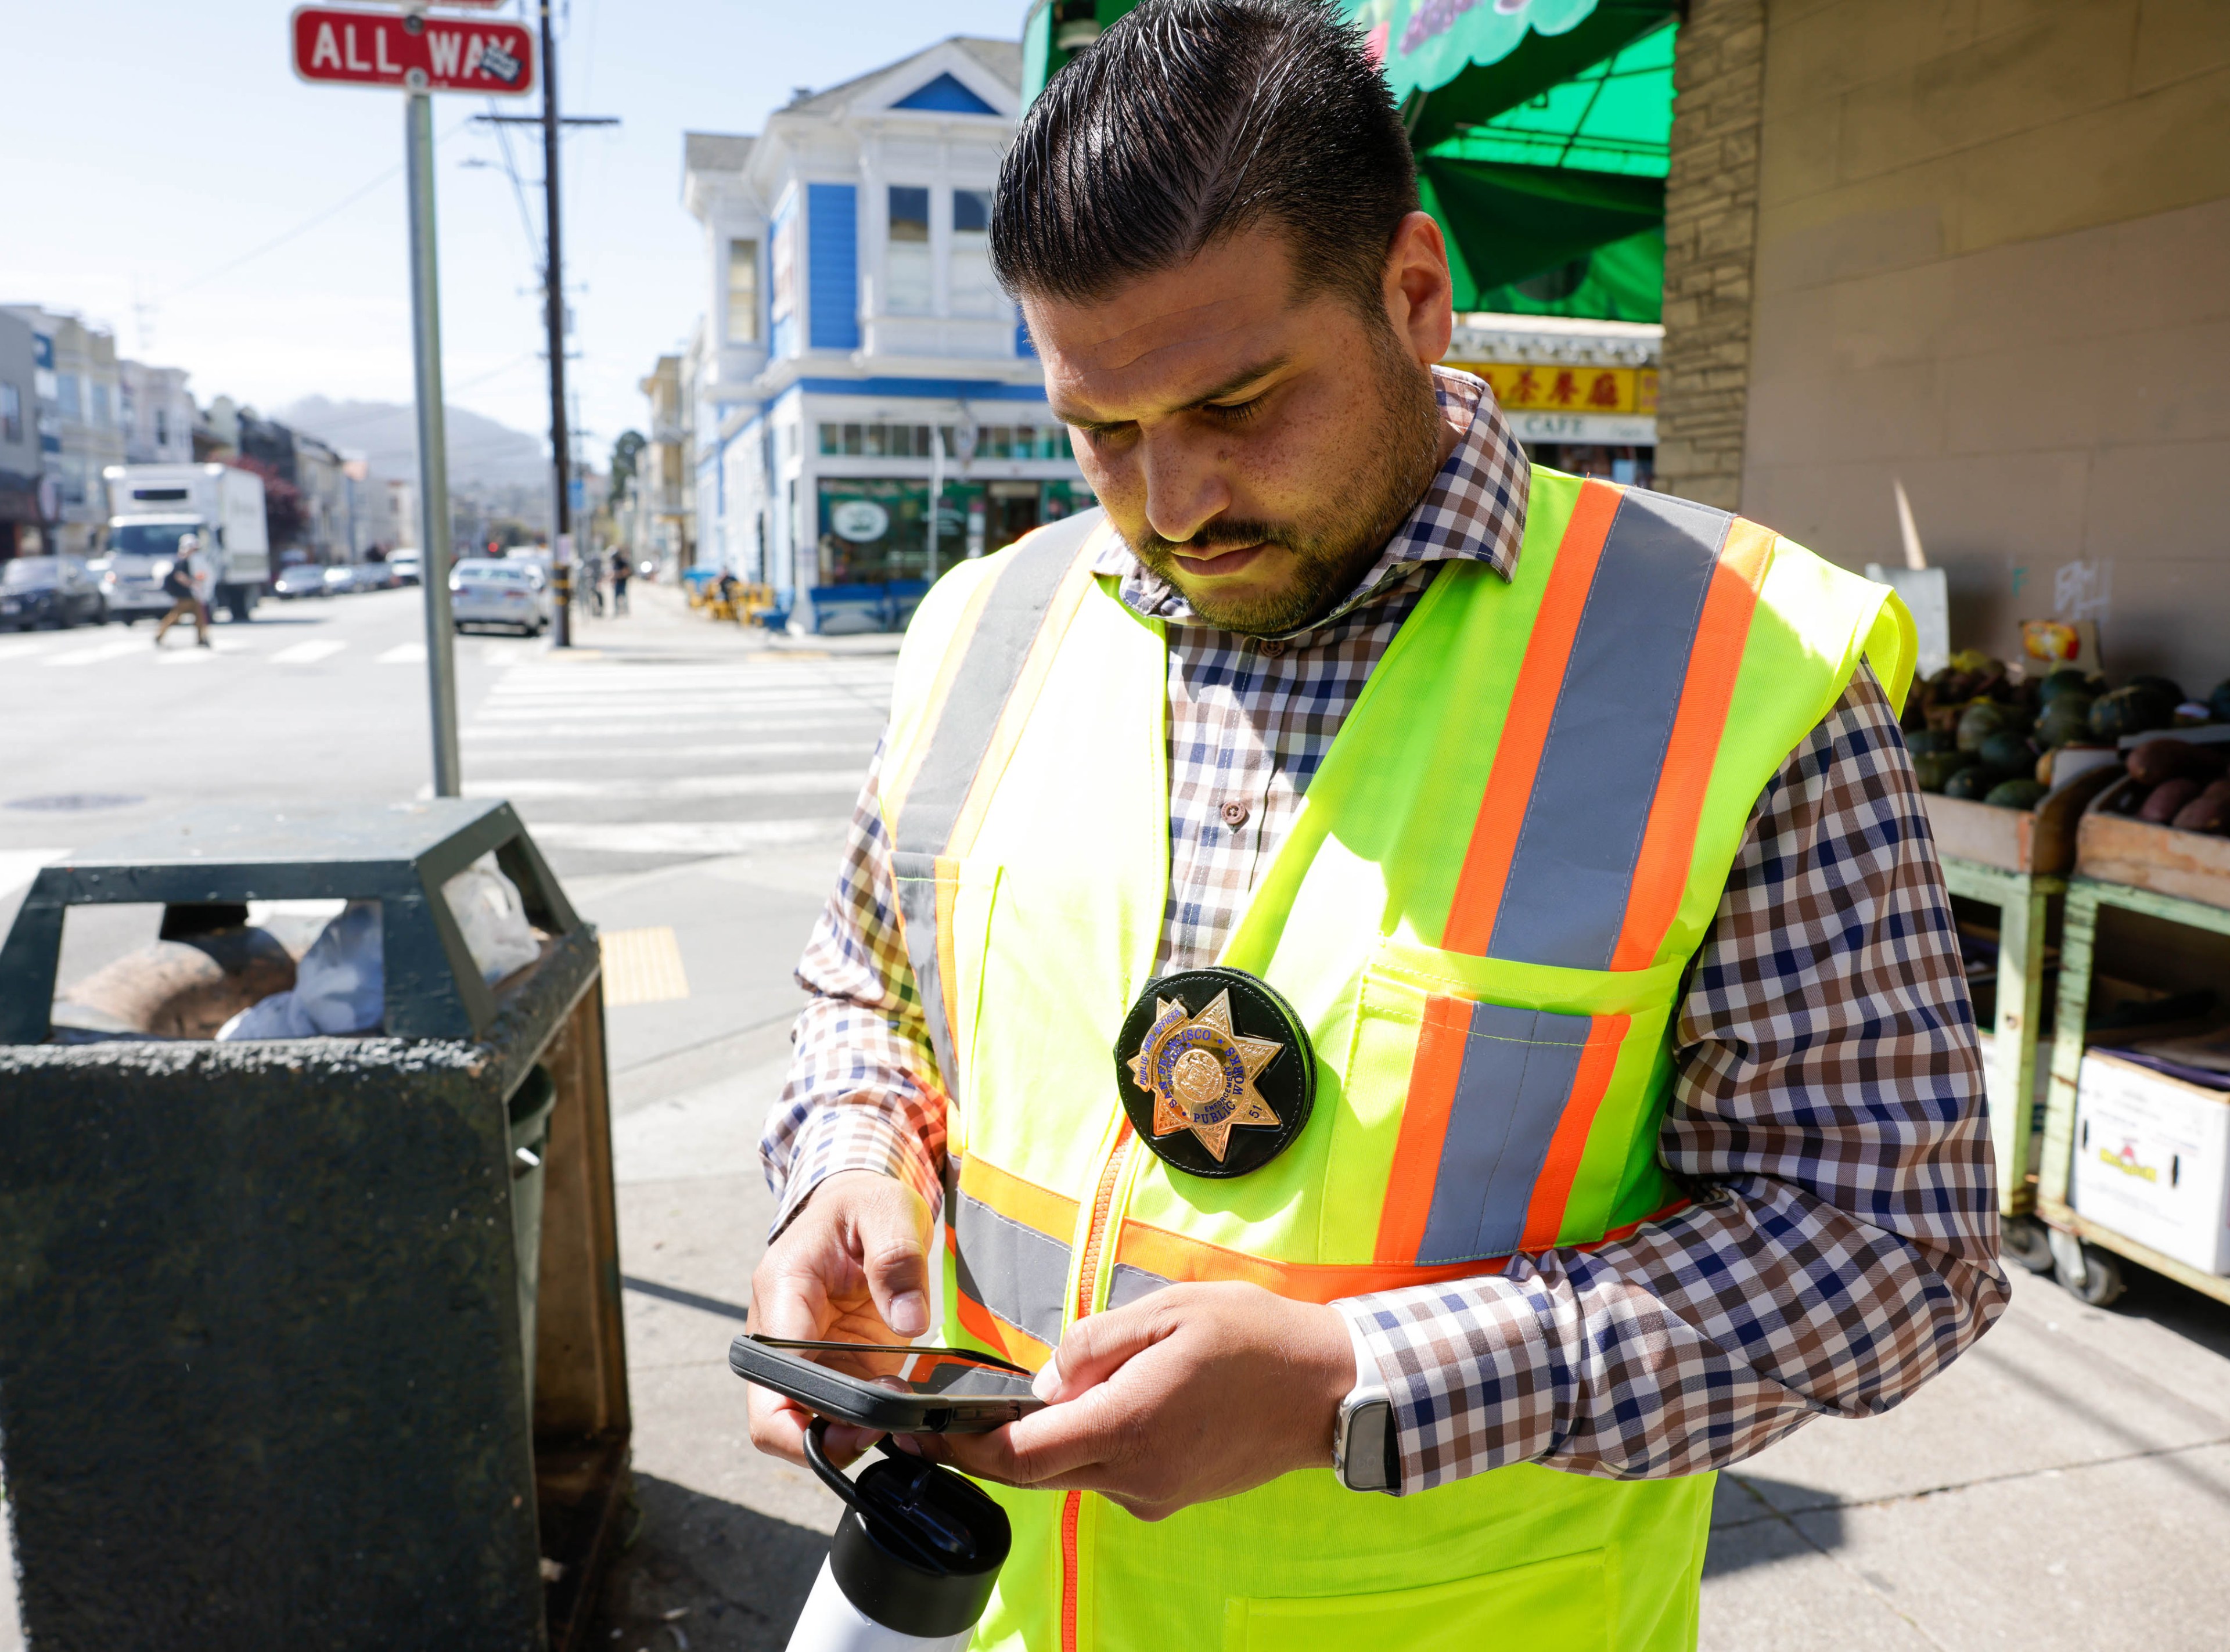 A man in a high-vis vest with a badge looks at his phone on a sunny street corner.